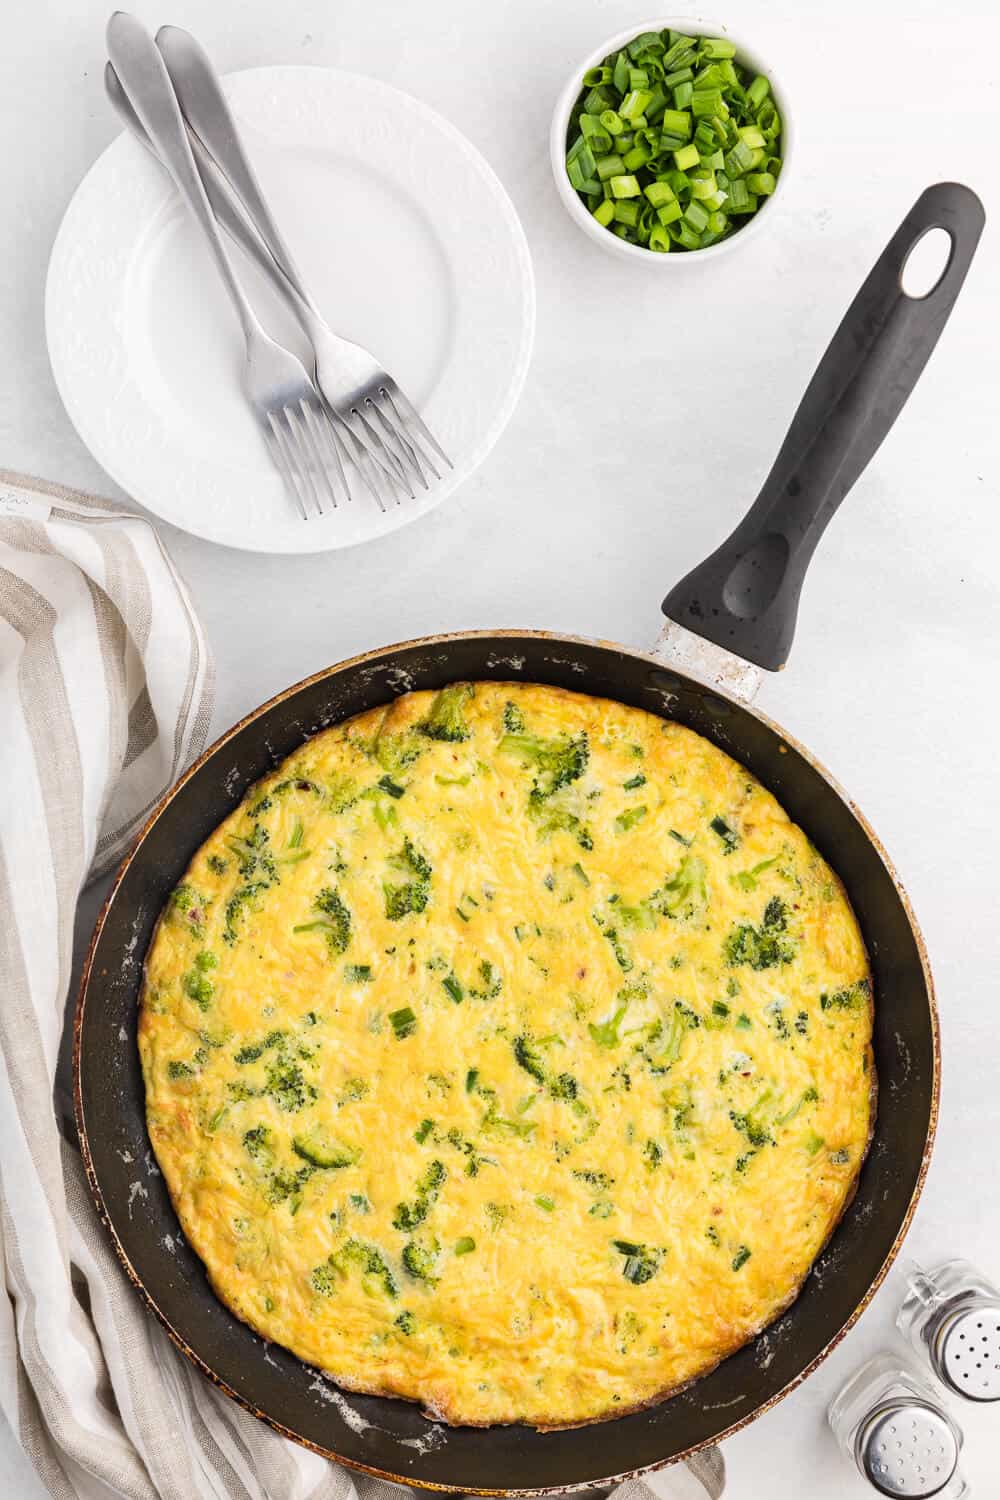 Broccoli Frittata - The classic and delicious combination of broccoli and cheese are the perfect pair in this quick and easy oven-baked frittata. Fresh or frozen broccoli can be used to make this quick and easy meal.